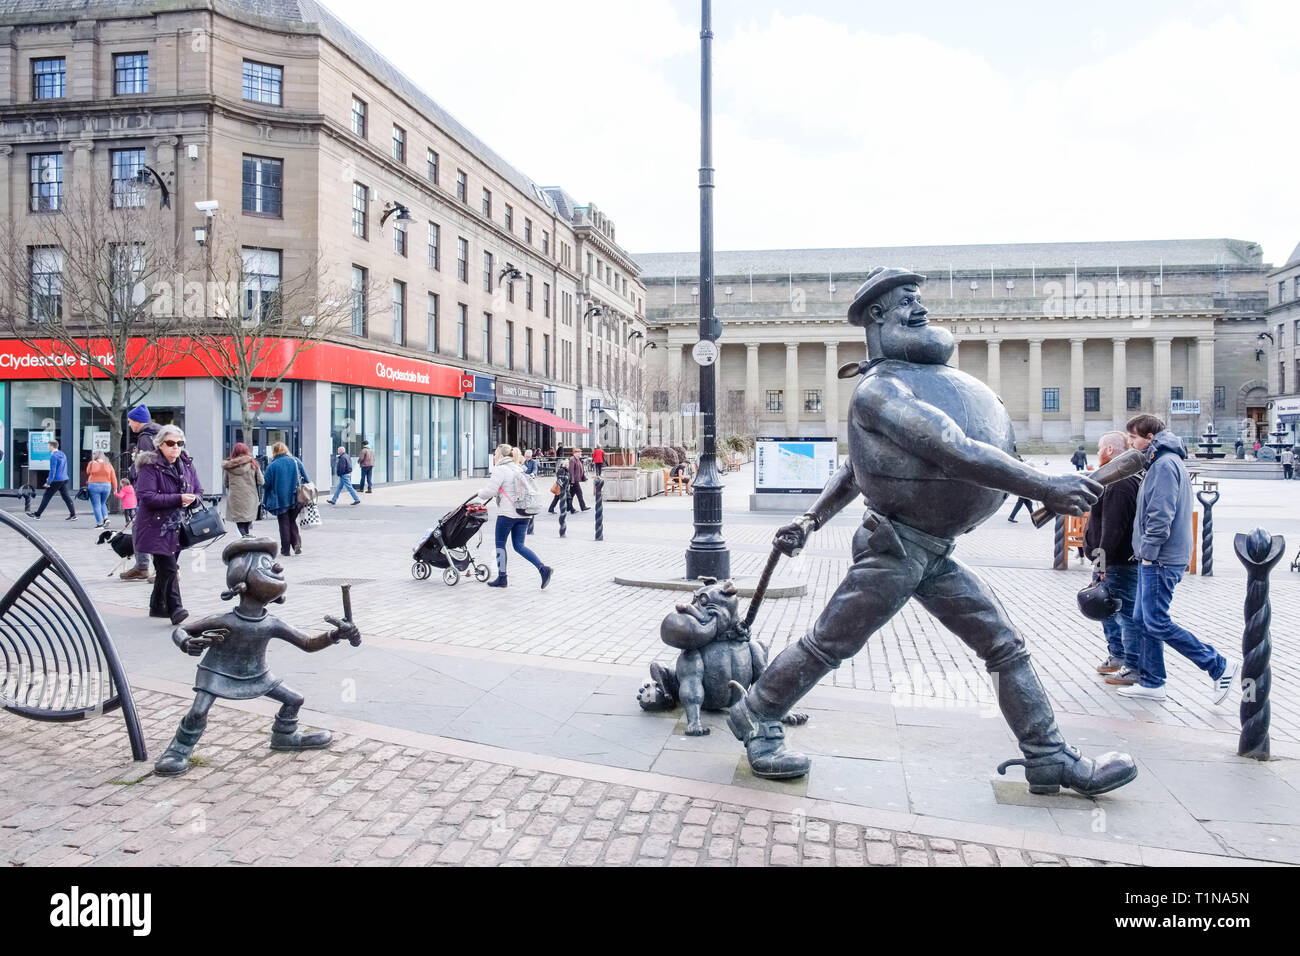 Dundee, Scotland, UK - March 23, 2019: Desperate Dan and other character Statues within Dundee city Centre with the Caird Hall in the background Stock Photo